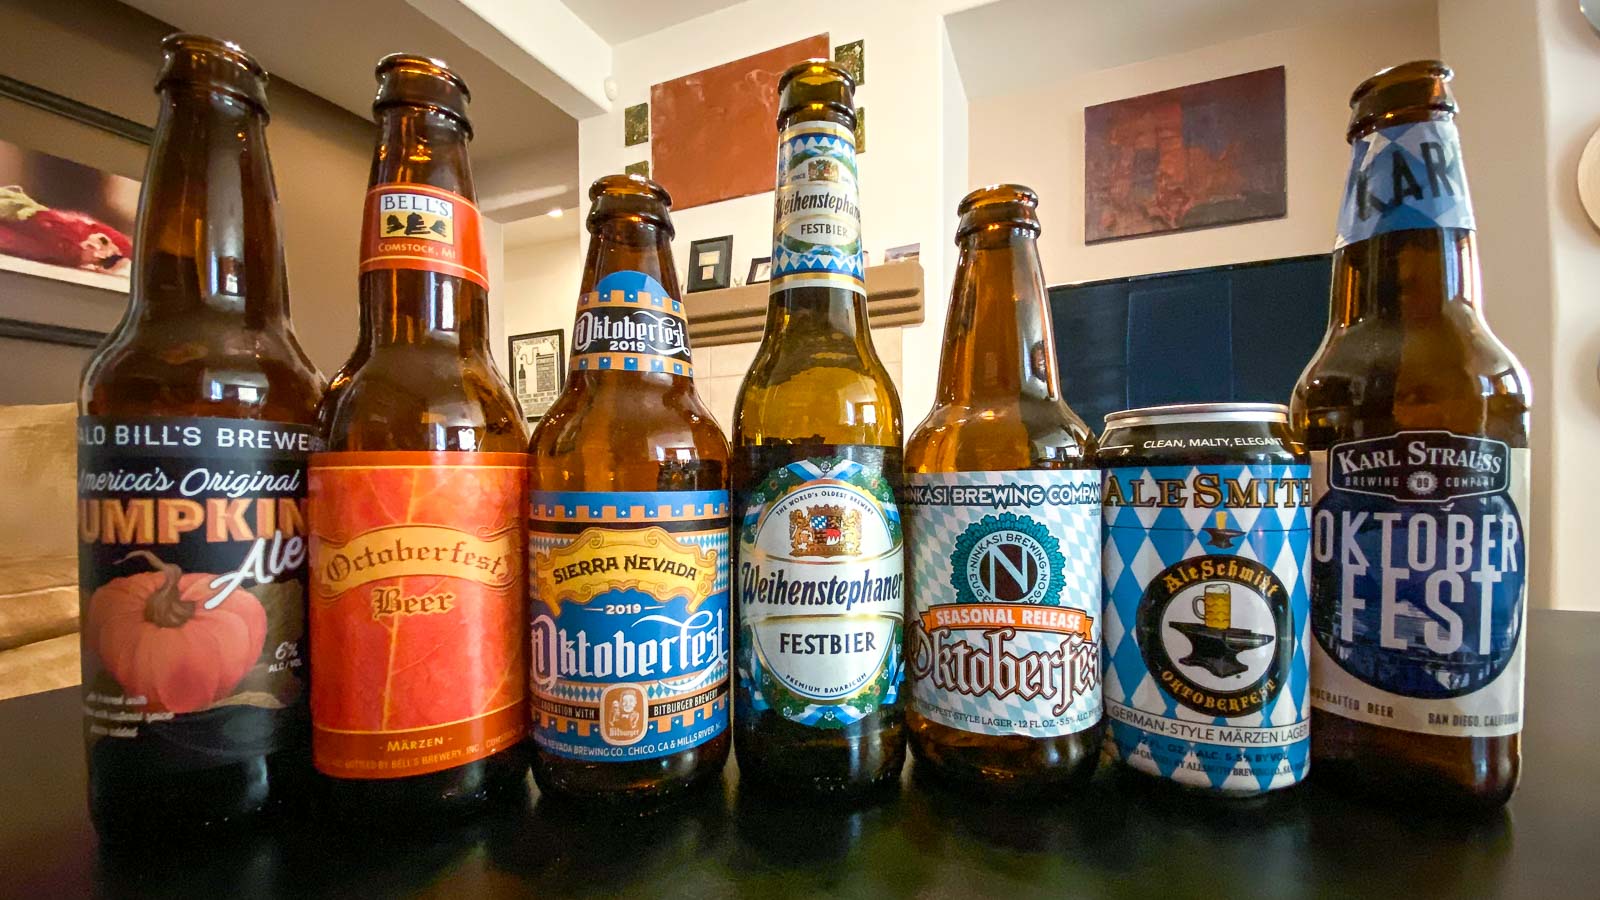 Pictured: Six Oktoberfest beers and one pumpkin ale.